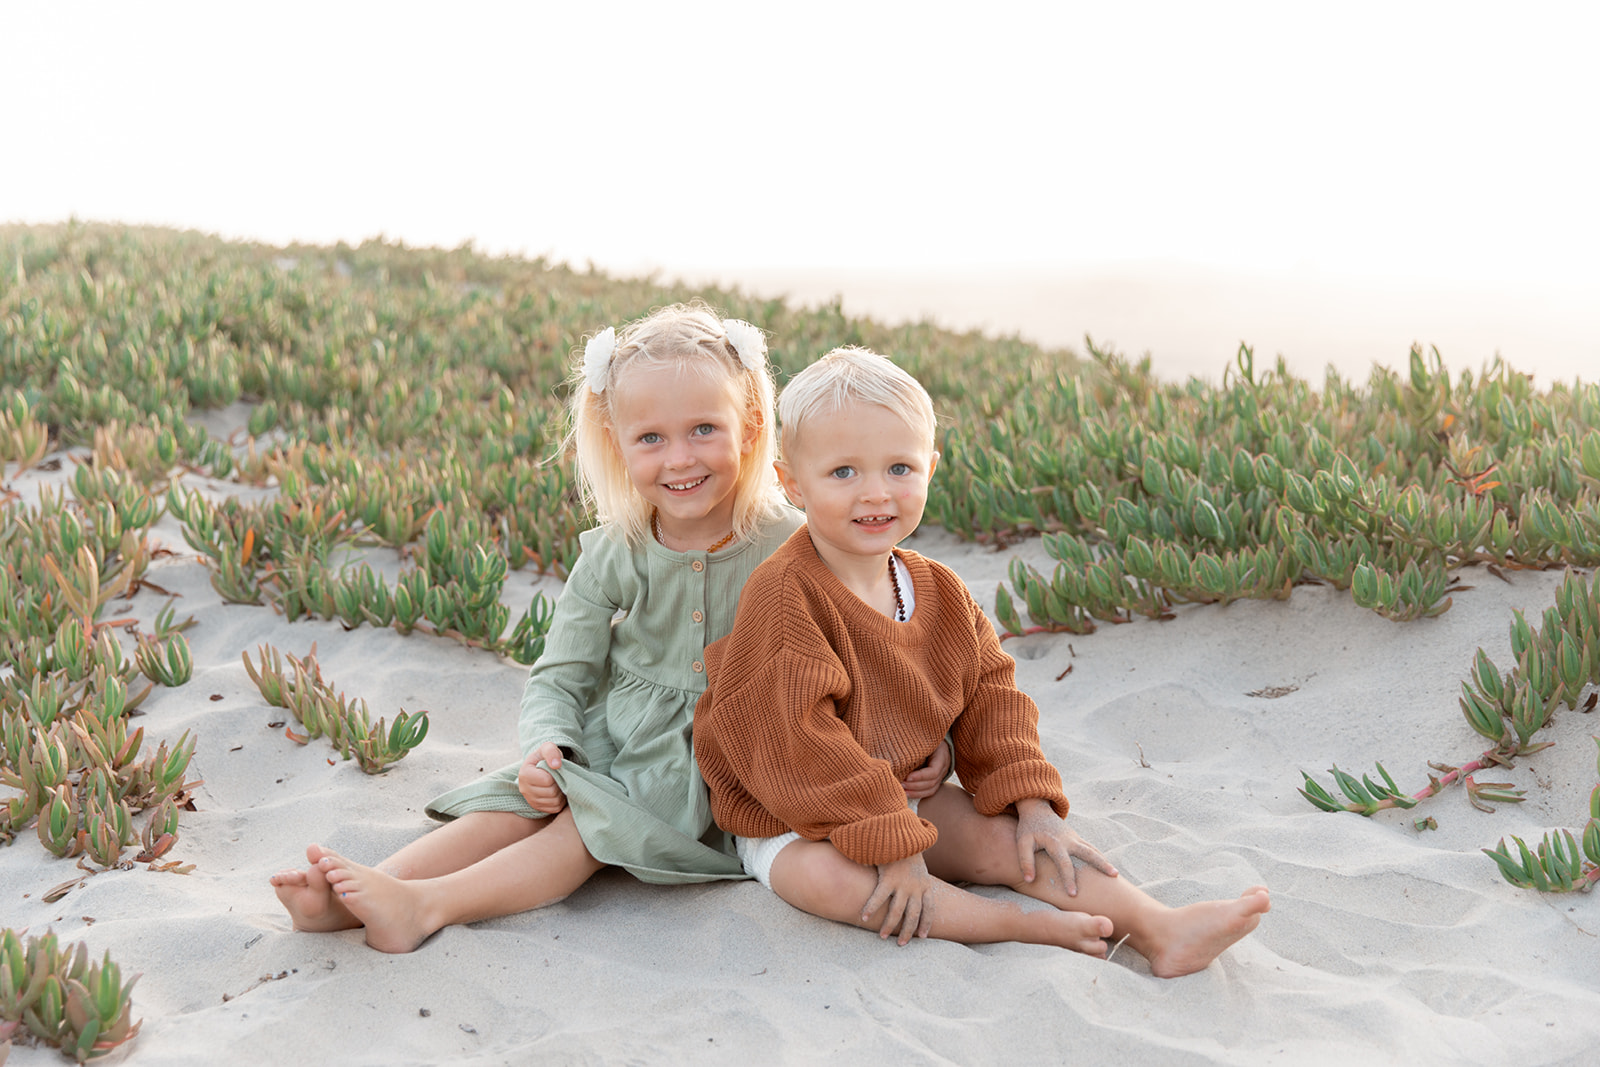 A young girl and her younger brother sit on a beach dune at sunset hugging while wearing a green dress and orange sweater